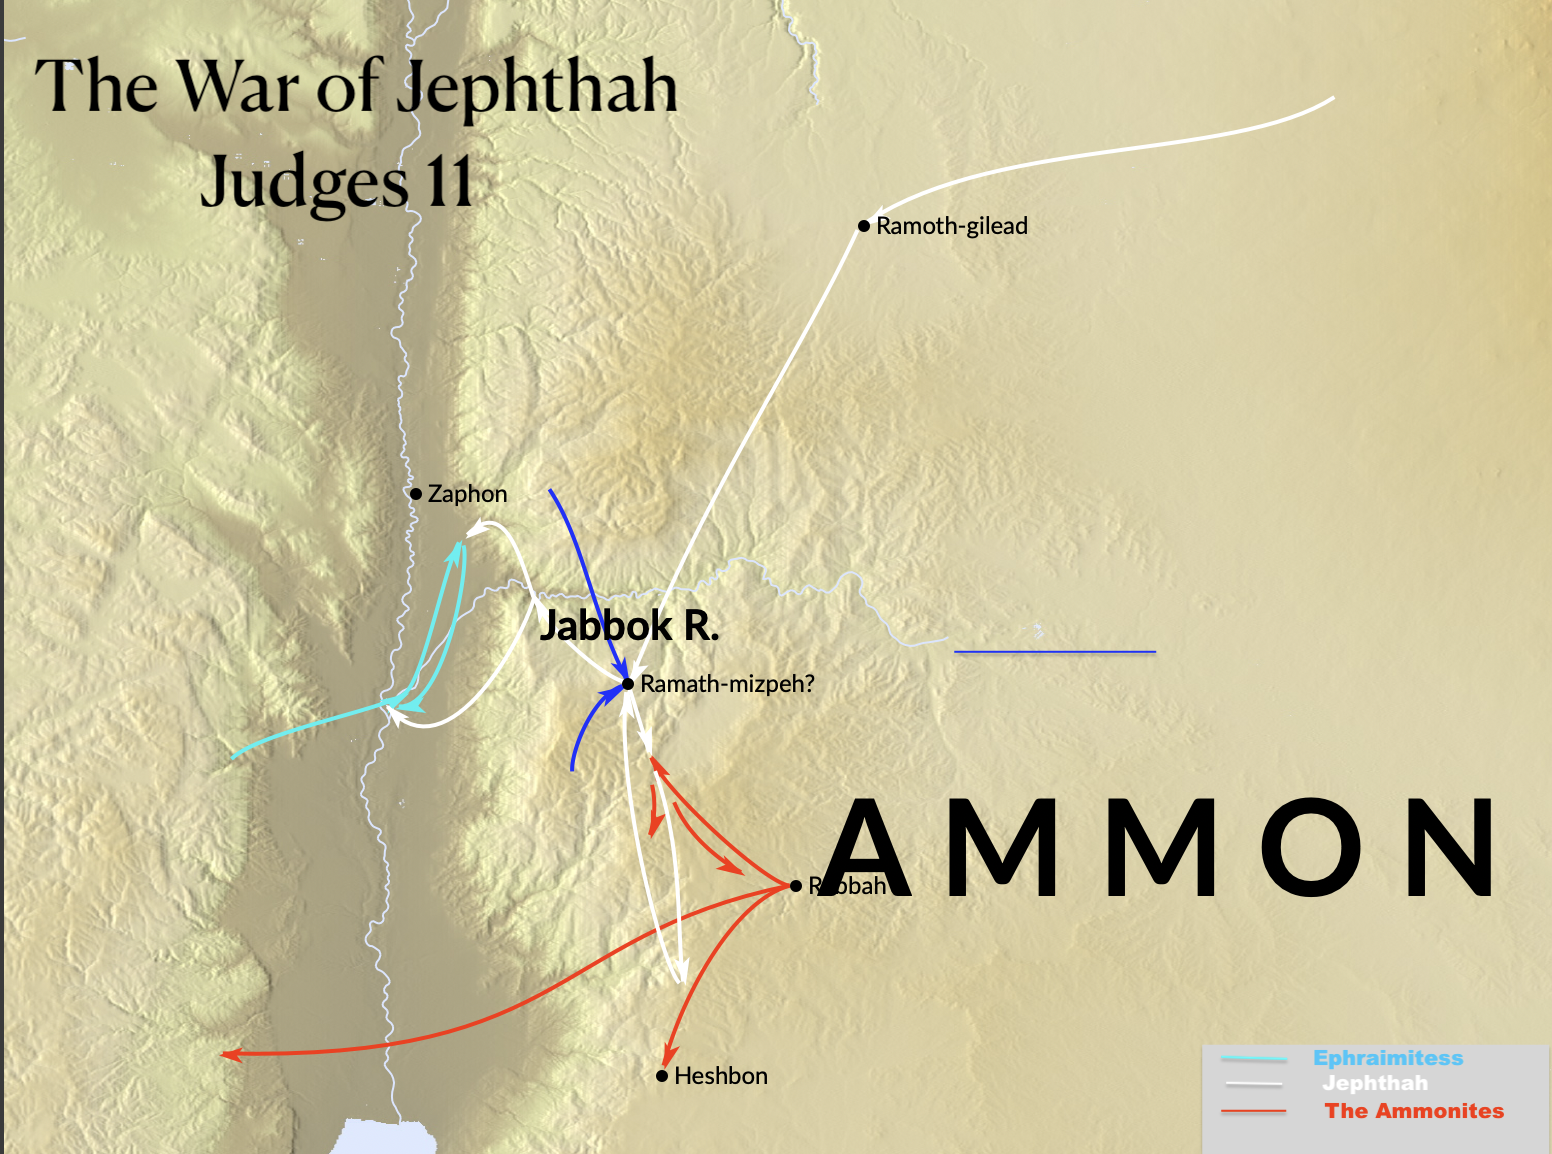 The tribe of Gad participated in the war against the Ammonites under Jephthah. Israel defeated the Ammonites.